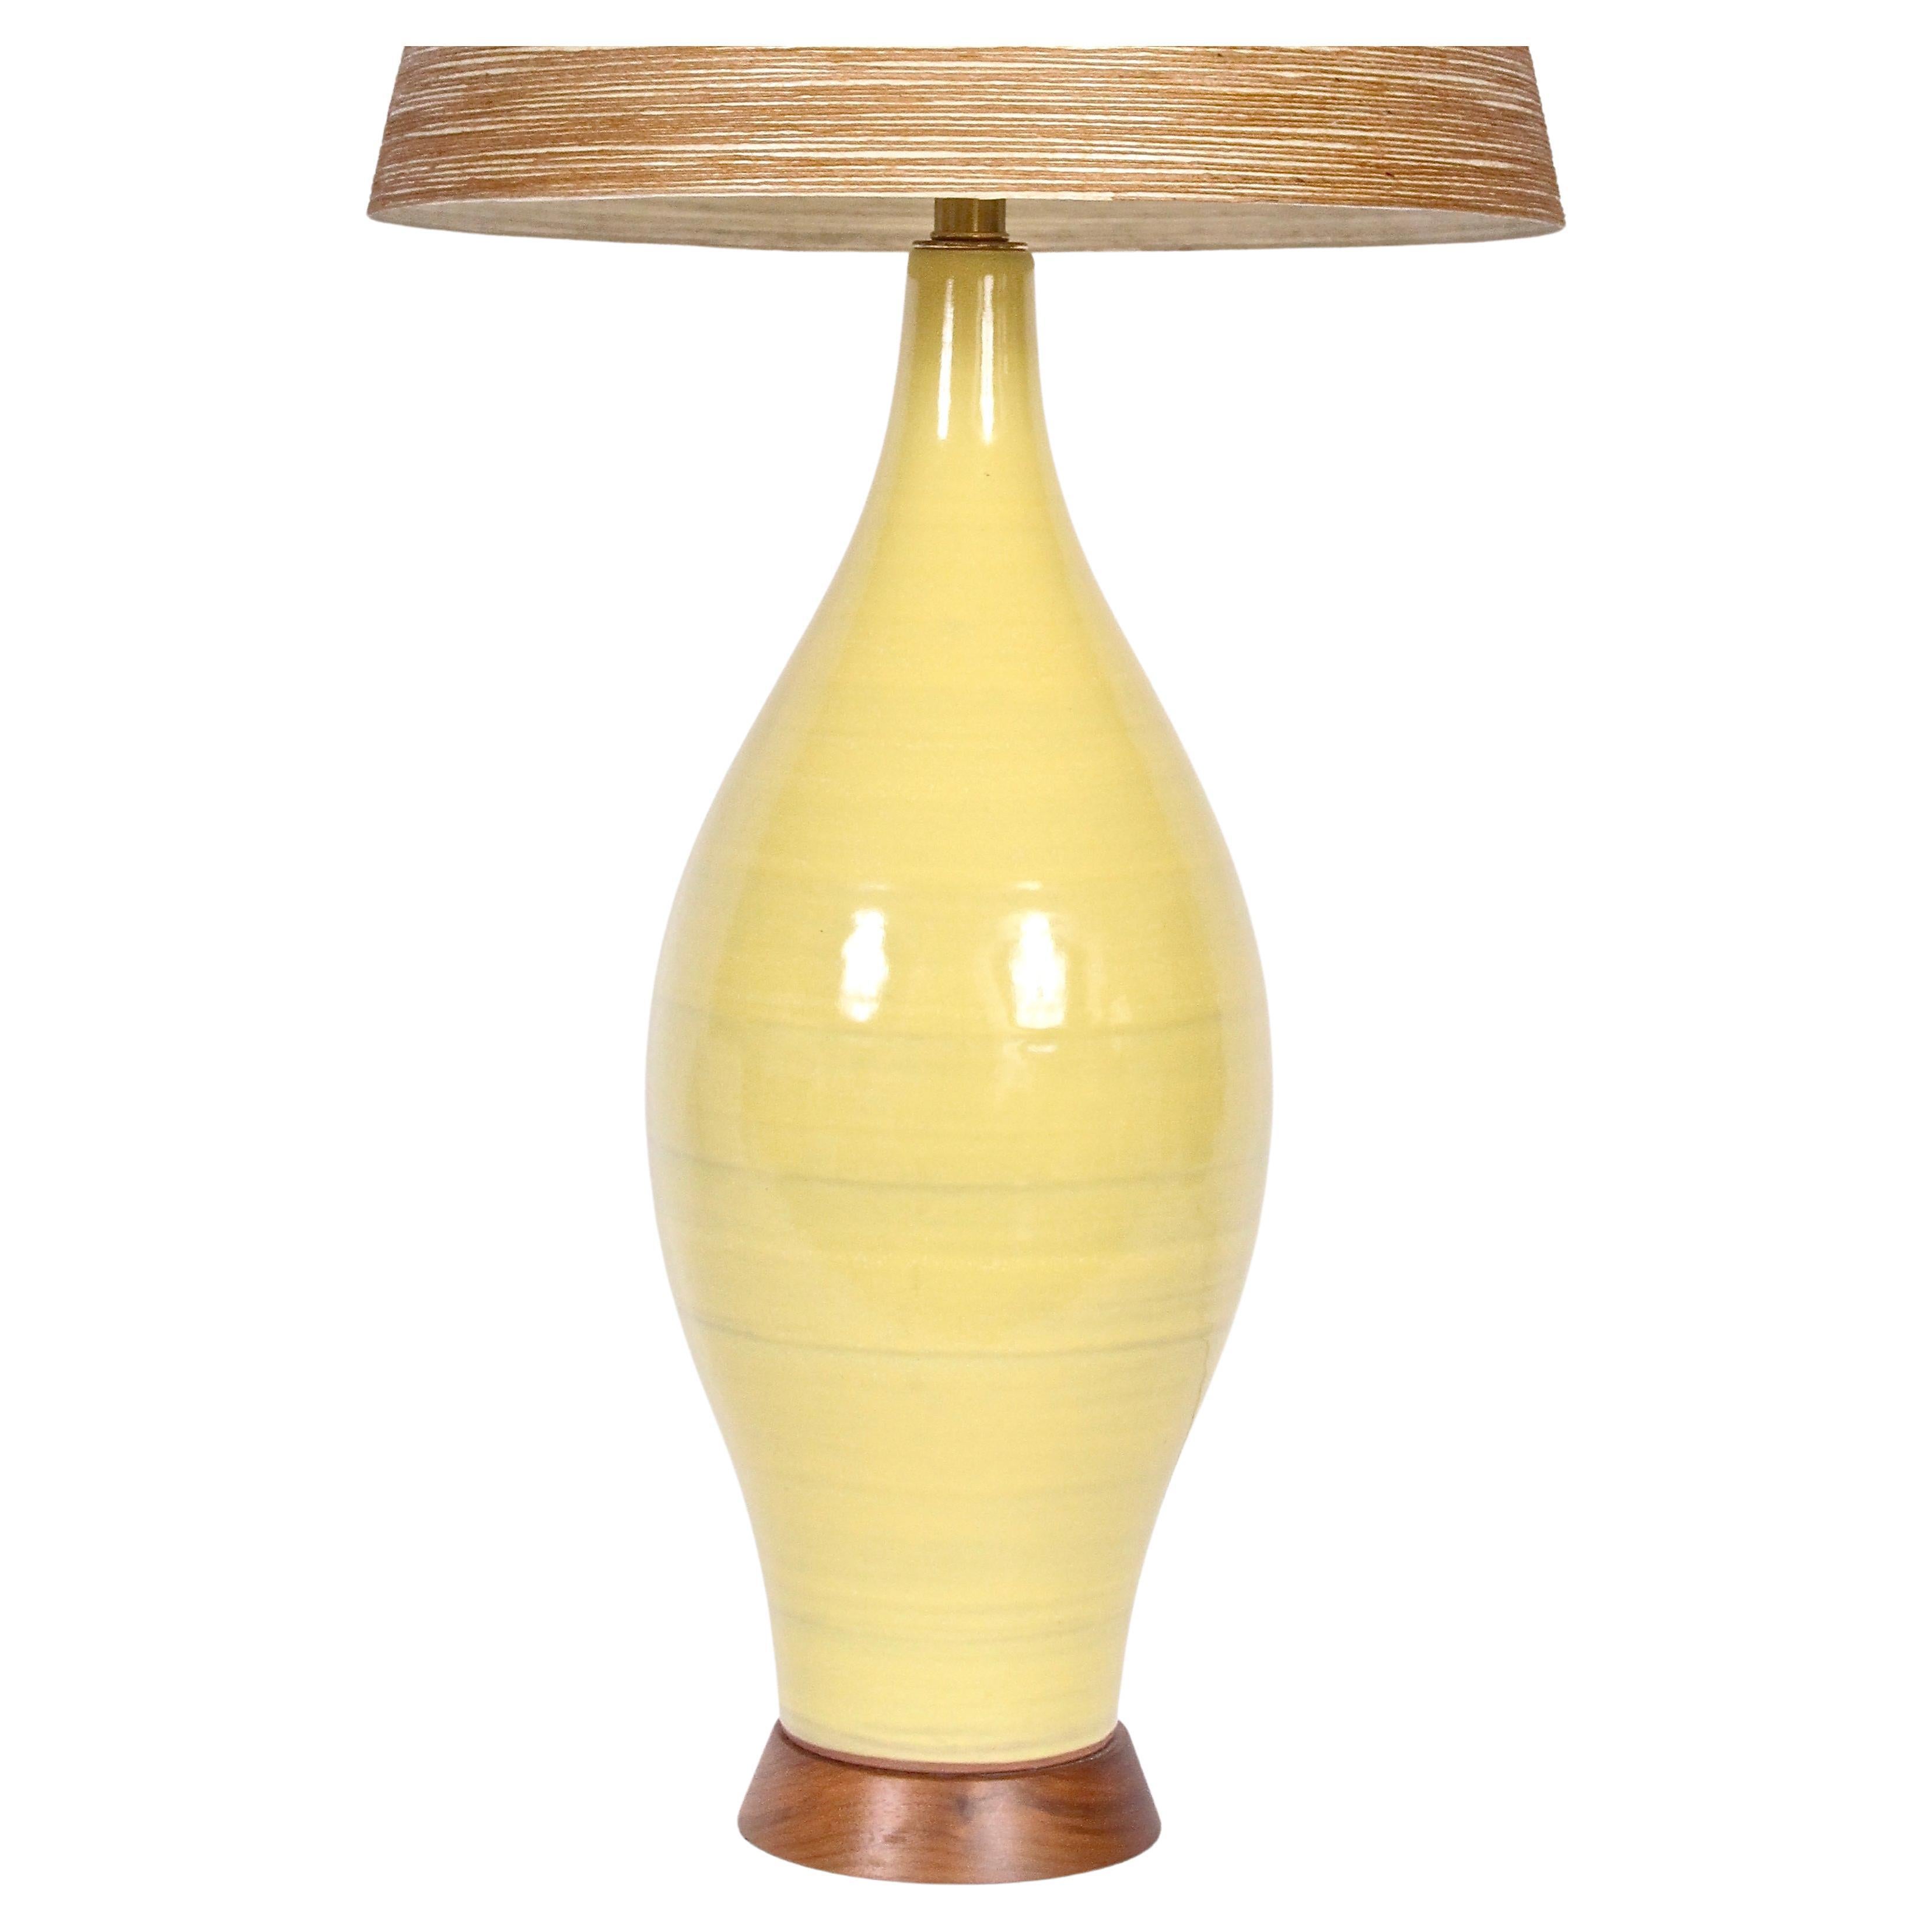 Monumental Design-Technics Bright Yellow Banded Art Pottery Table Lamp For Sale